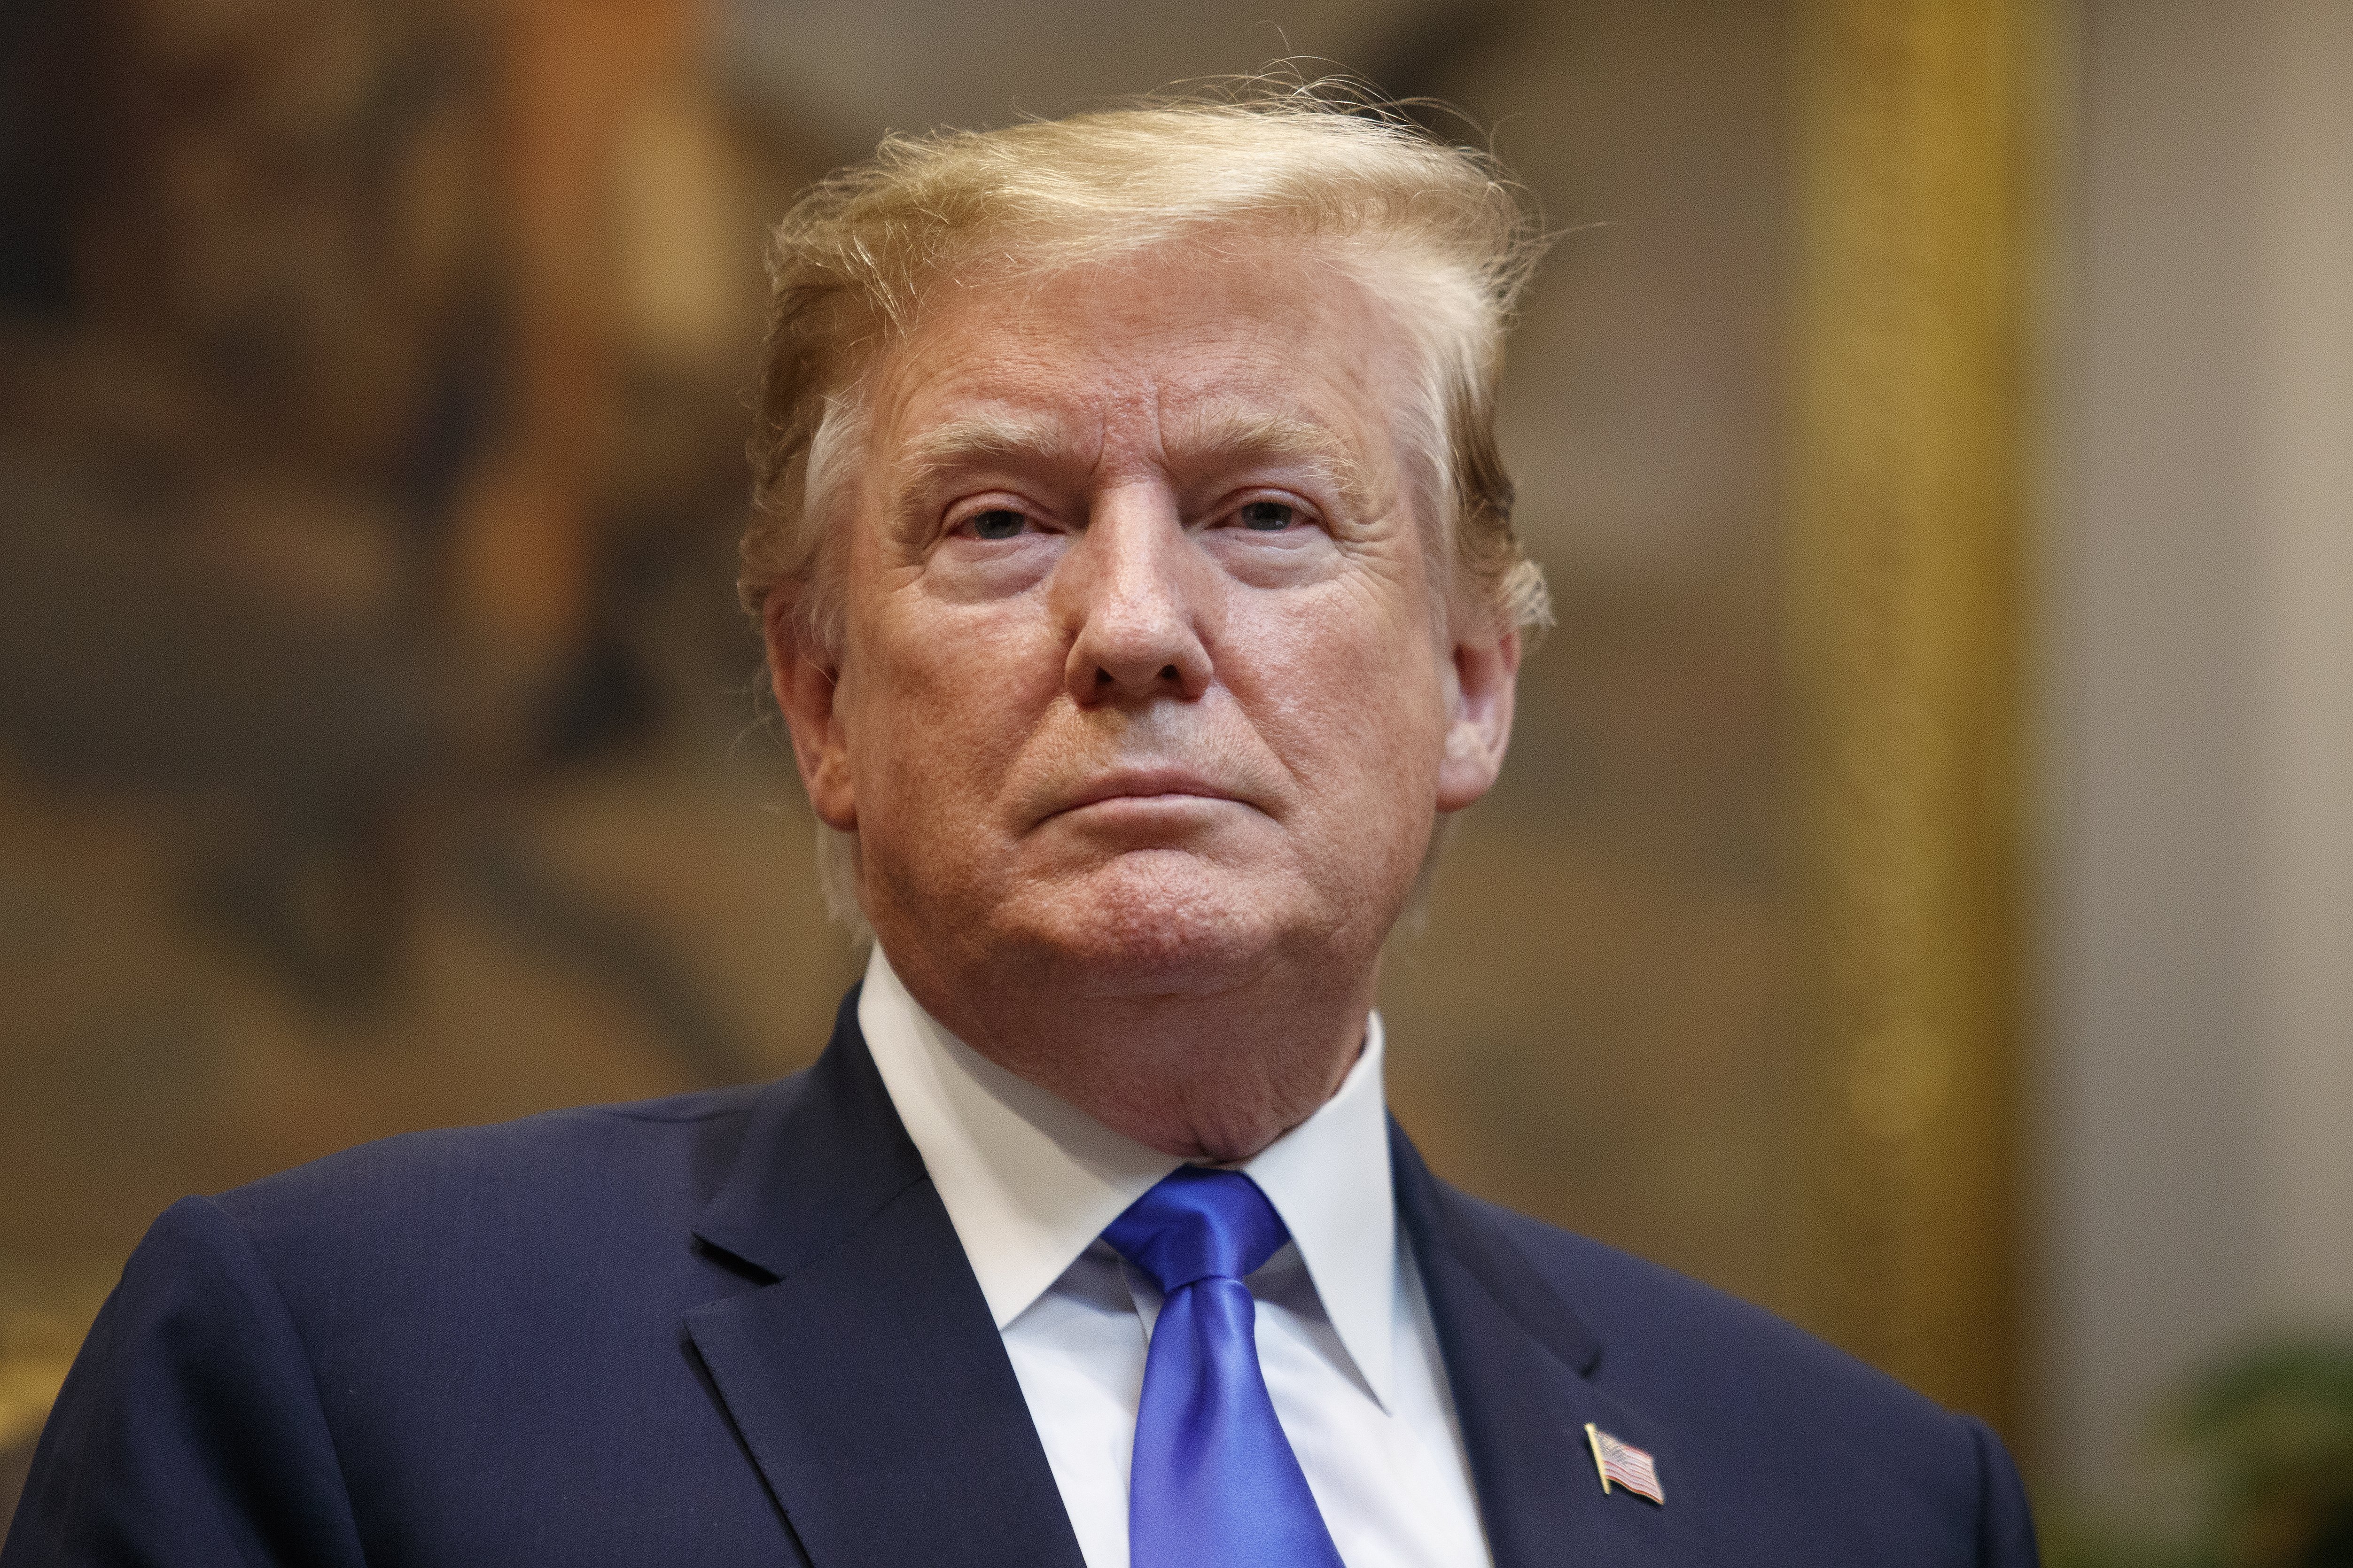 Donald Trump delivers remarks on 5G deployment in the United States on April 12, 2019 | Photo: GettyImages